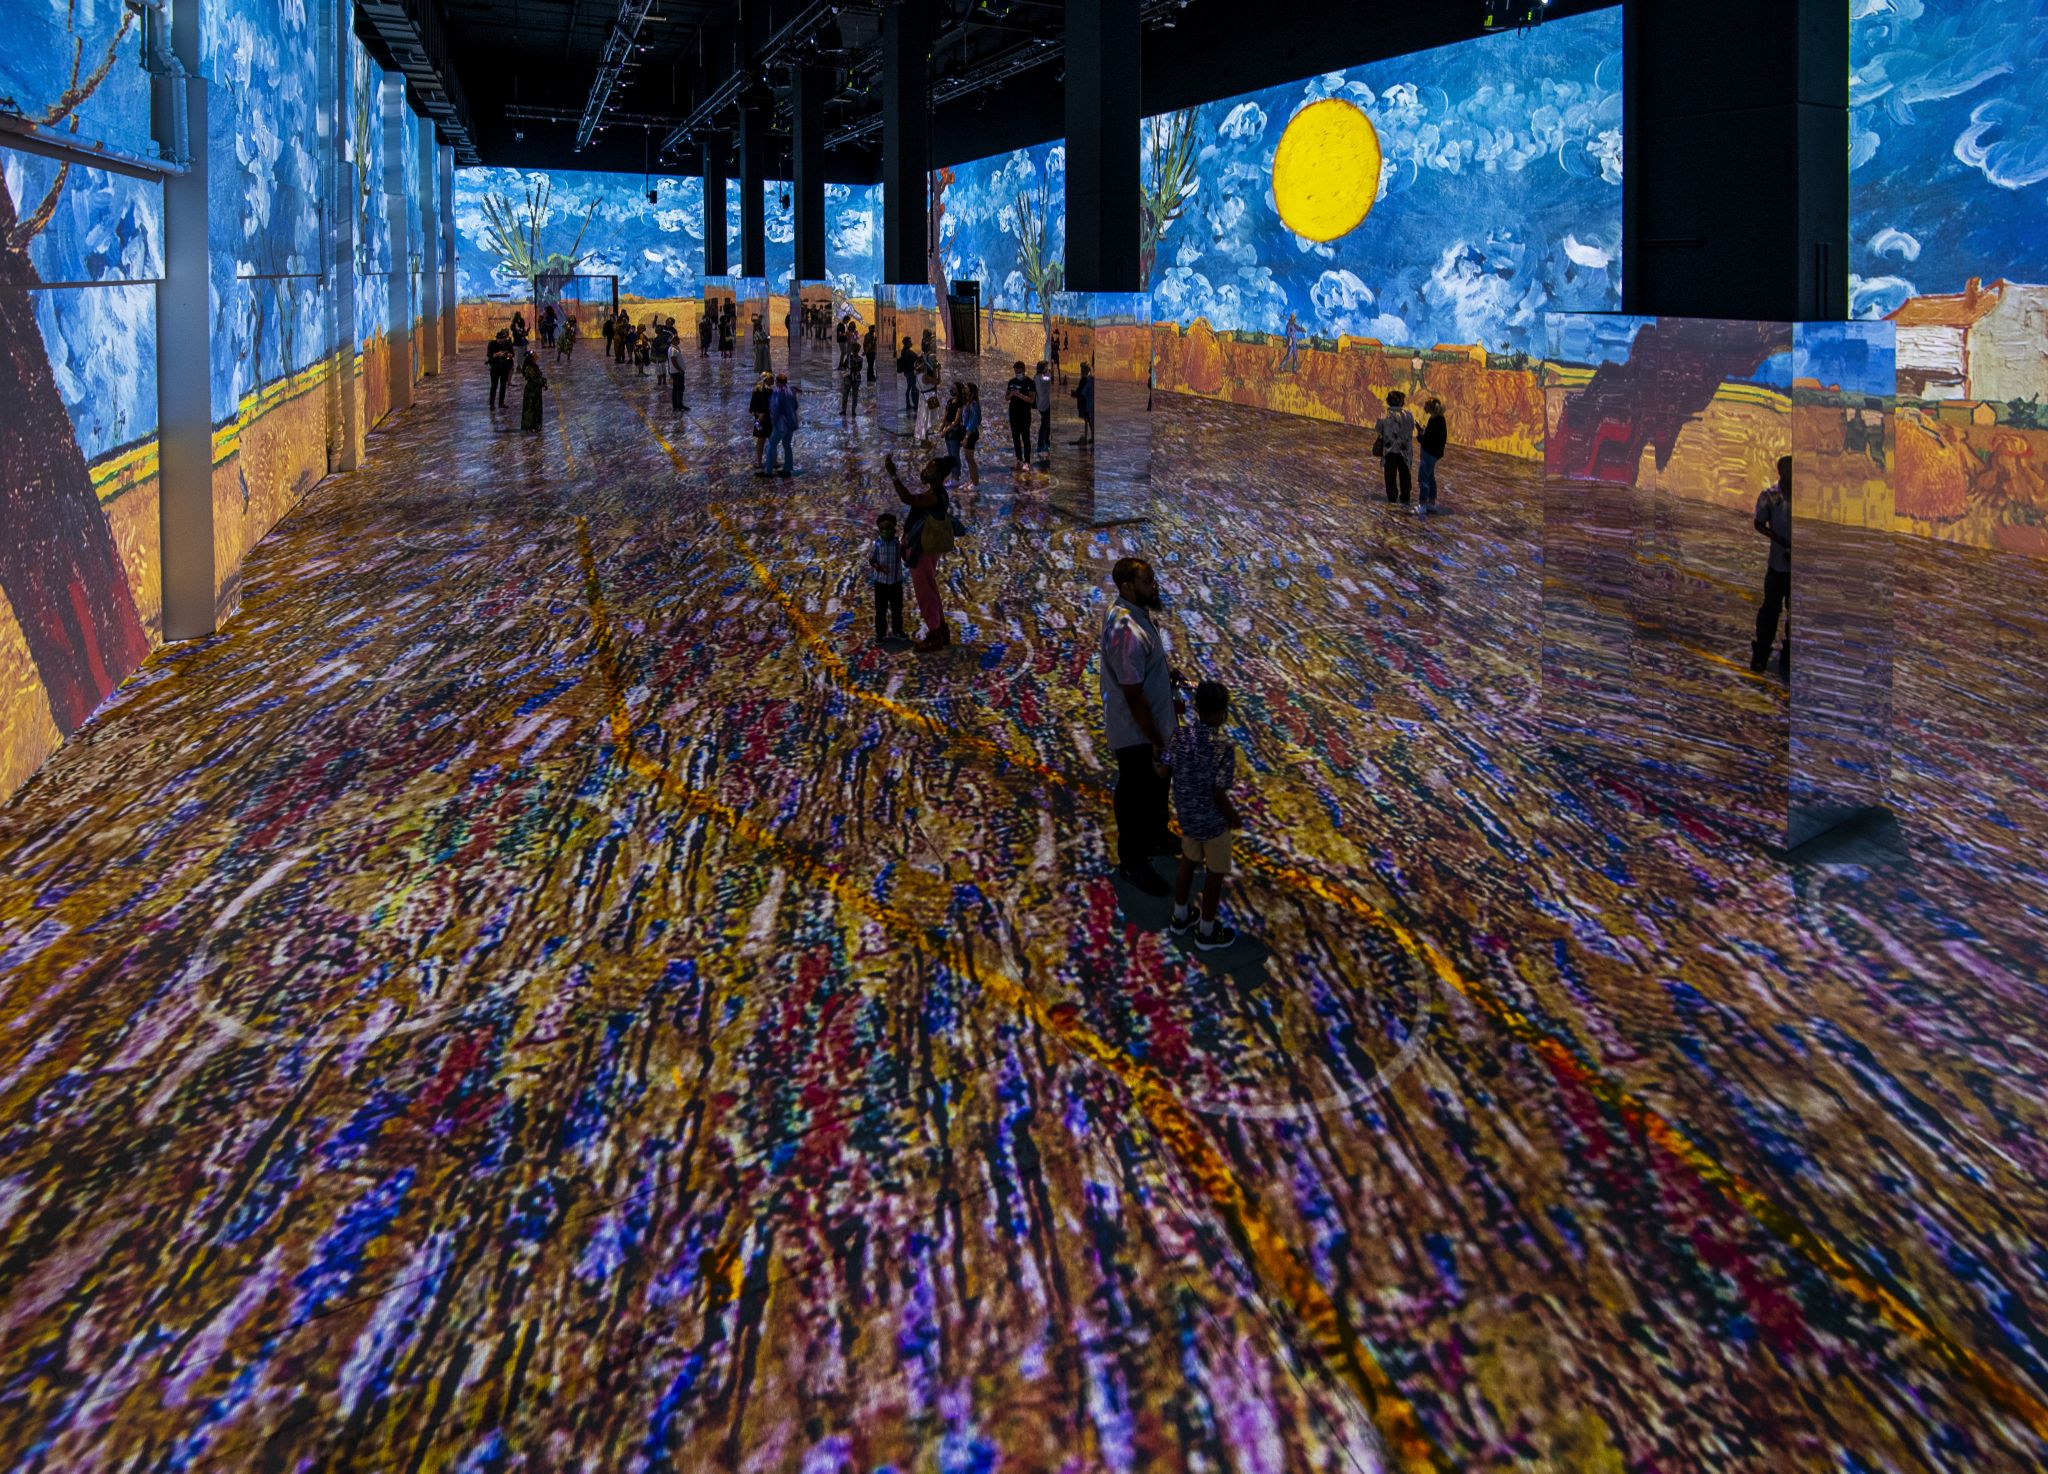 Here's why Houston's 'Immersive Gogh' its August opening to